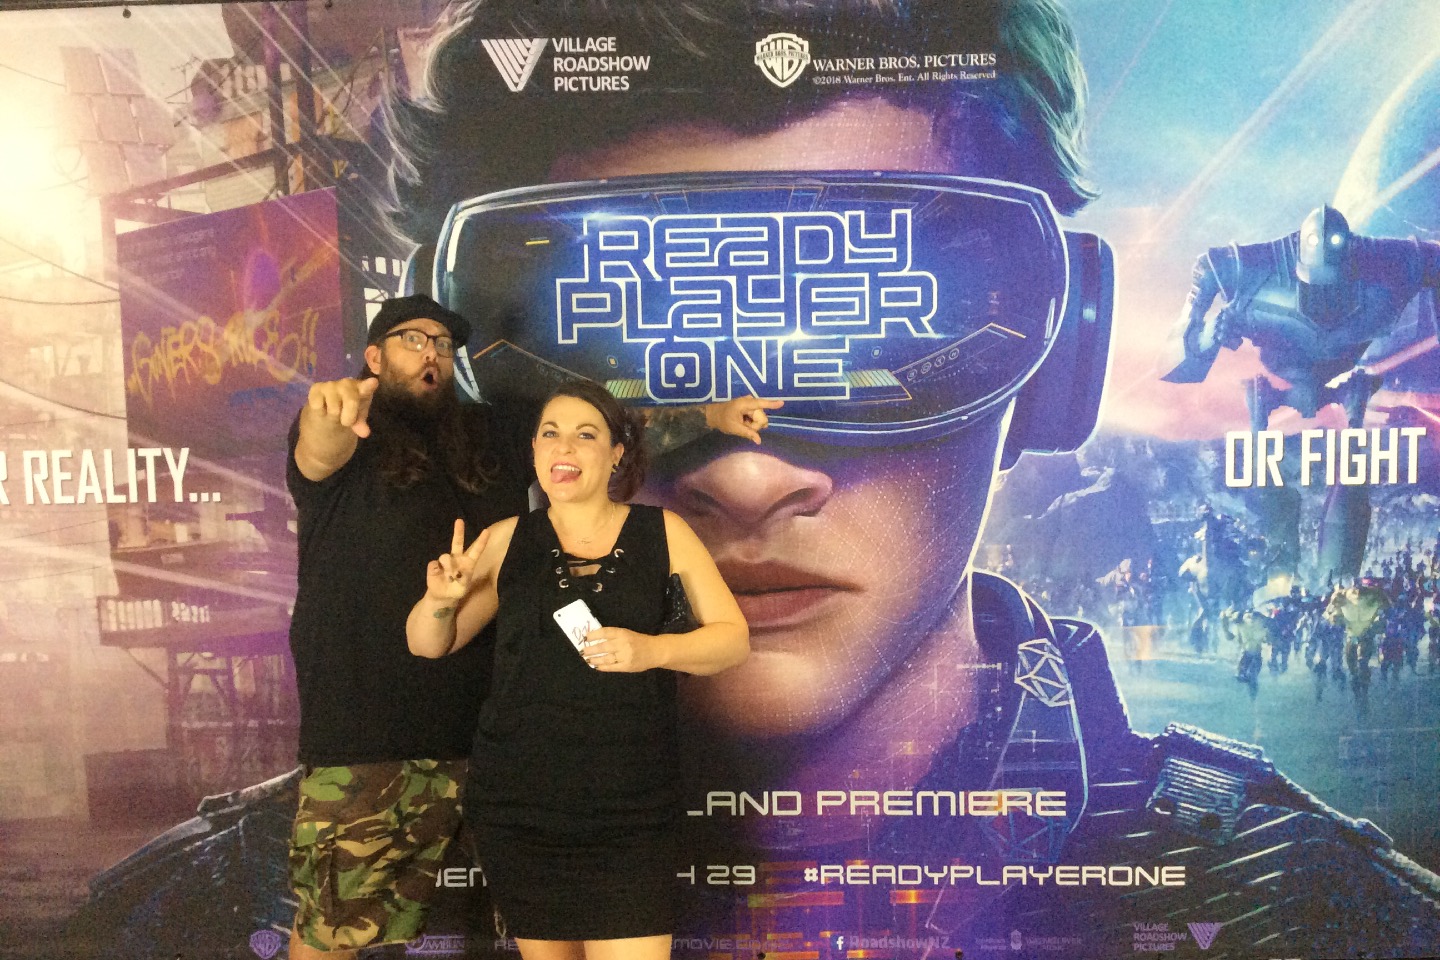 Basketball Yeti and One Take Kate at the NZ Premiere of Ready Player One | onetakekate.com